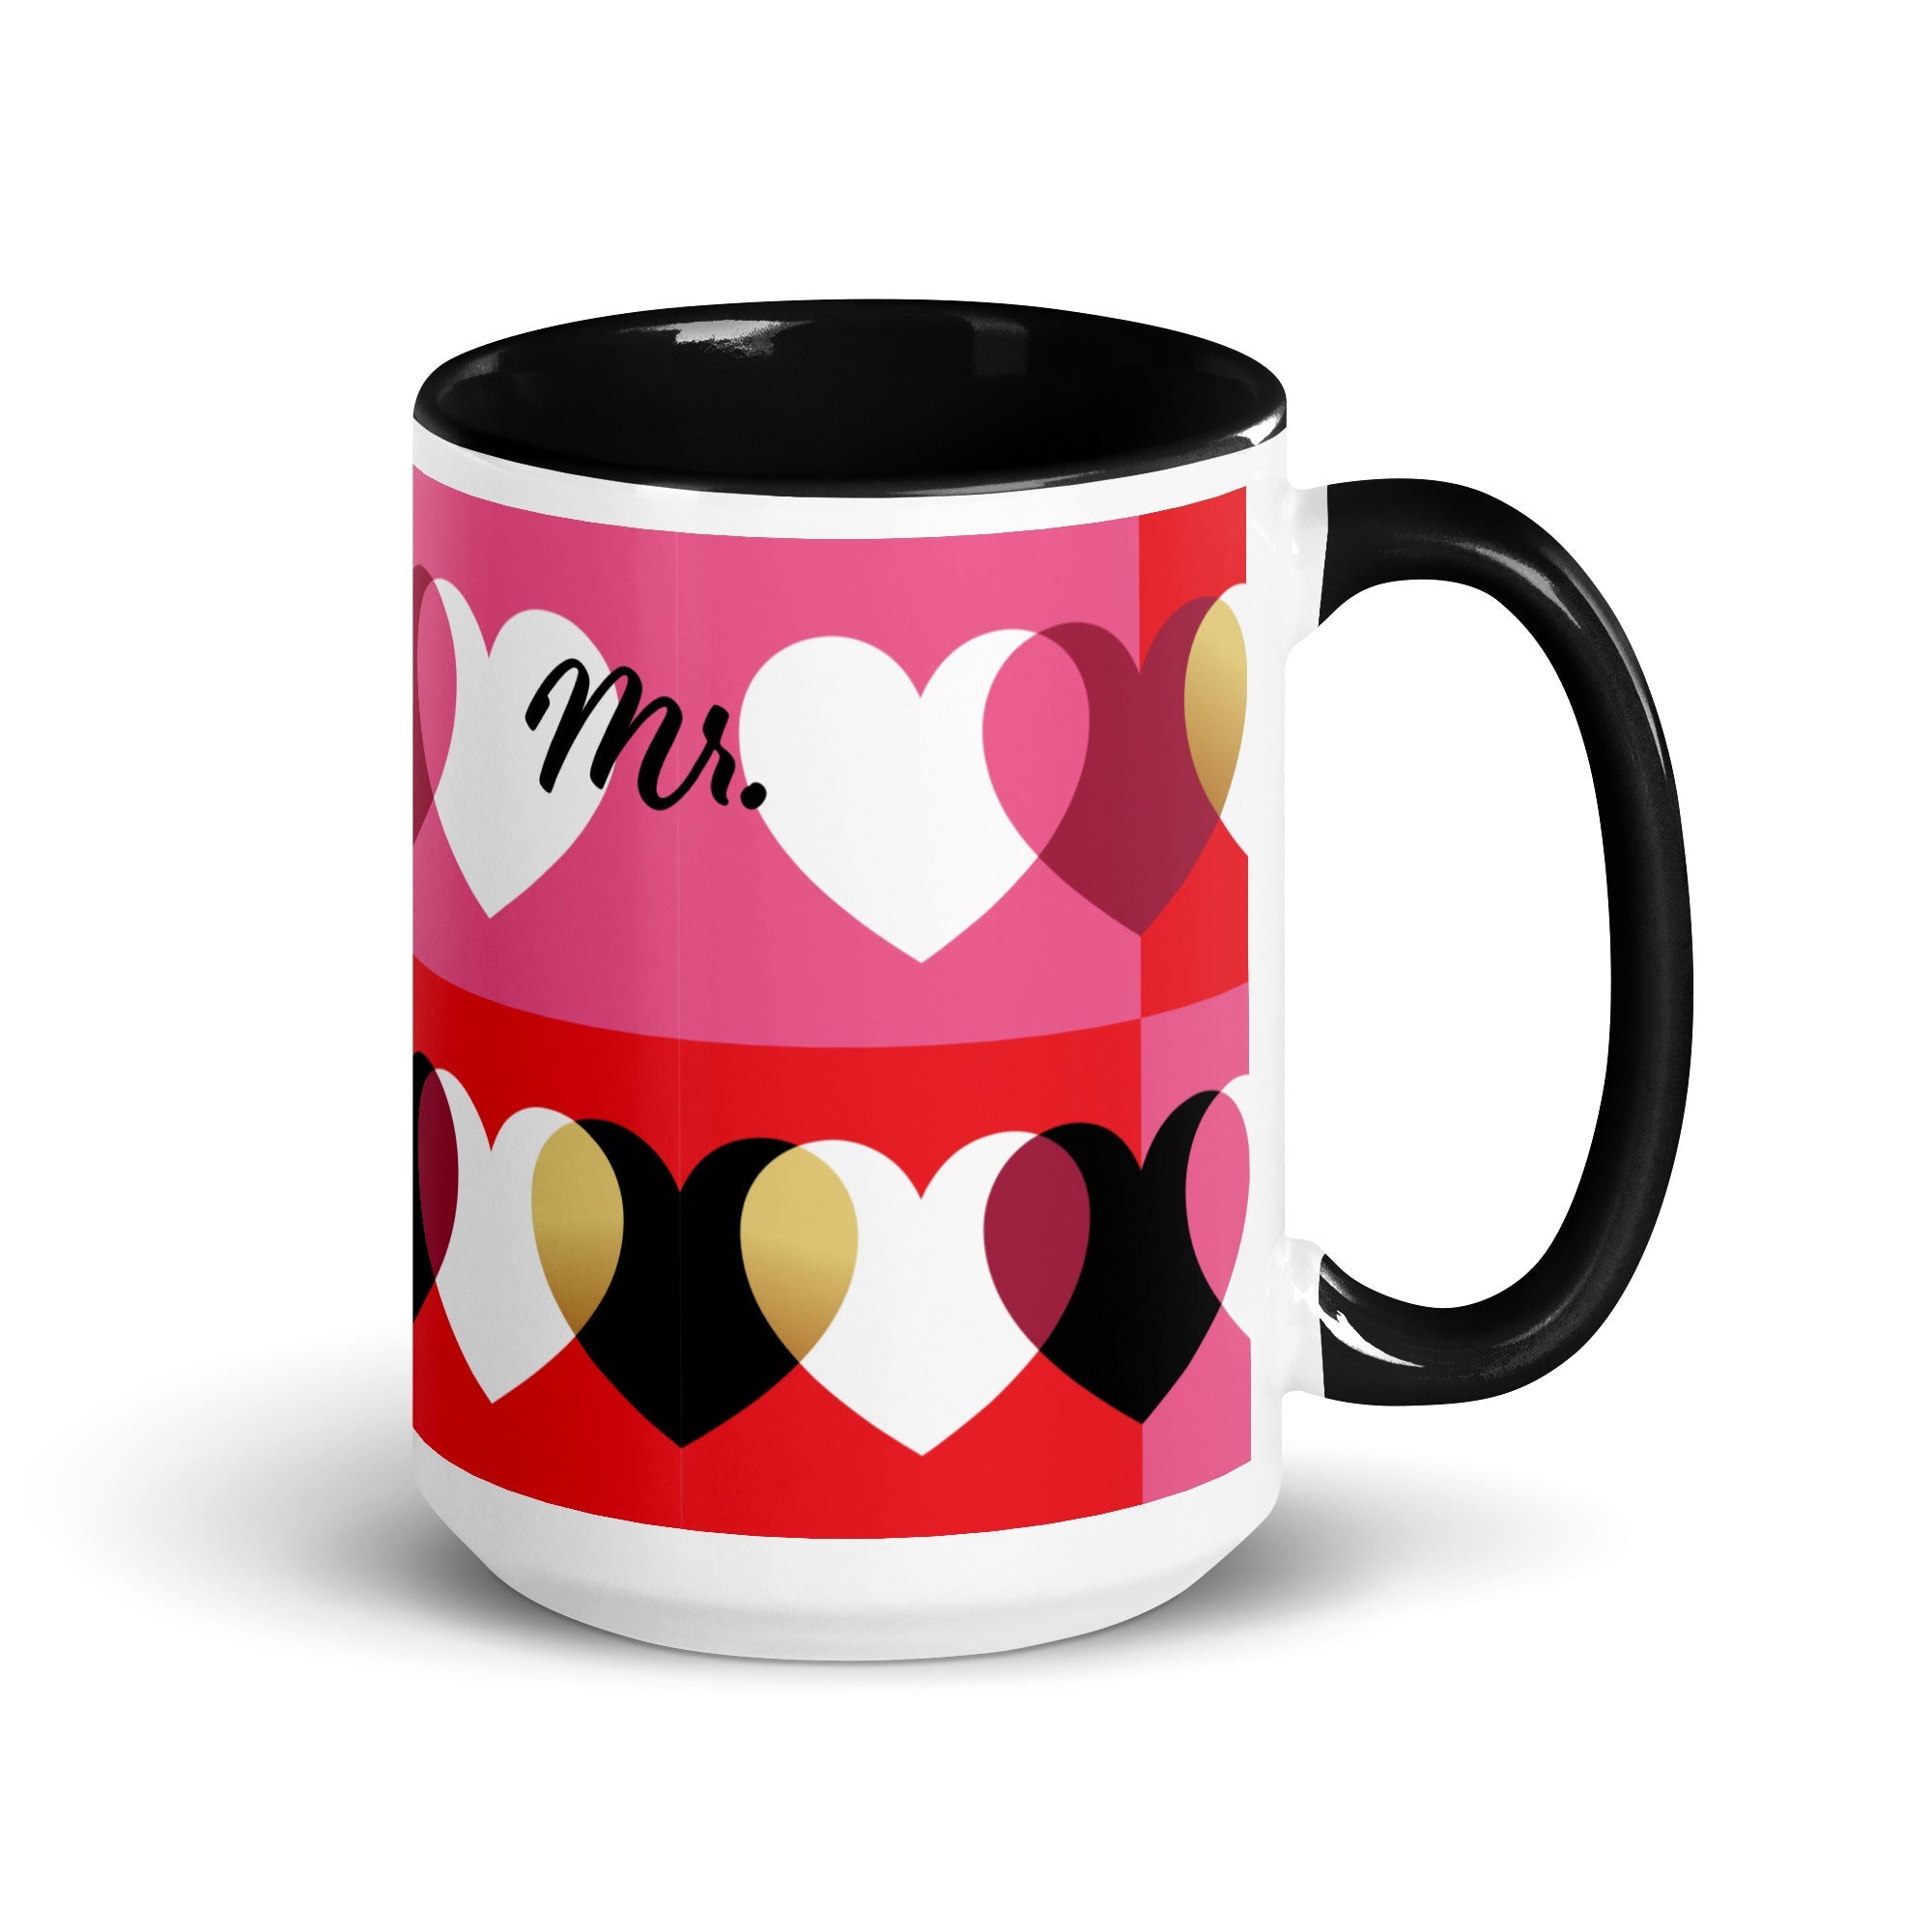 Love Mug set of 2, black and red, Mr. and Mrs, personalised-5